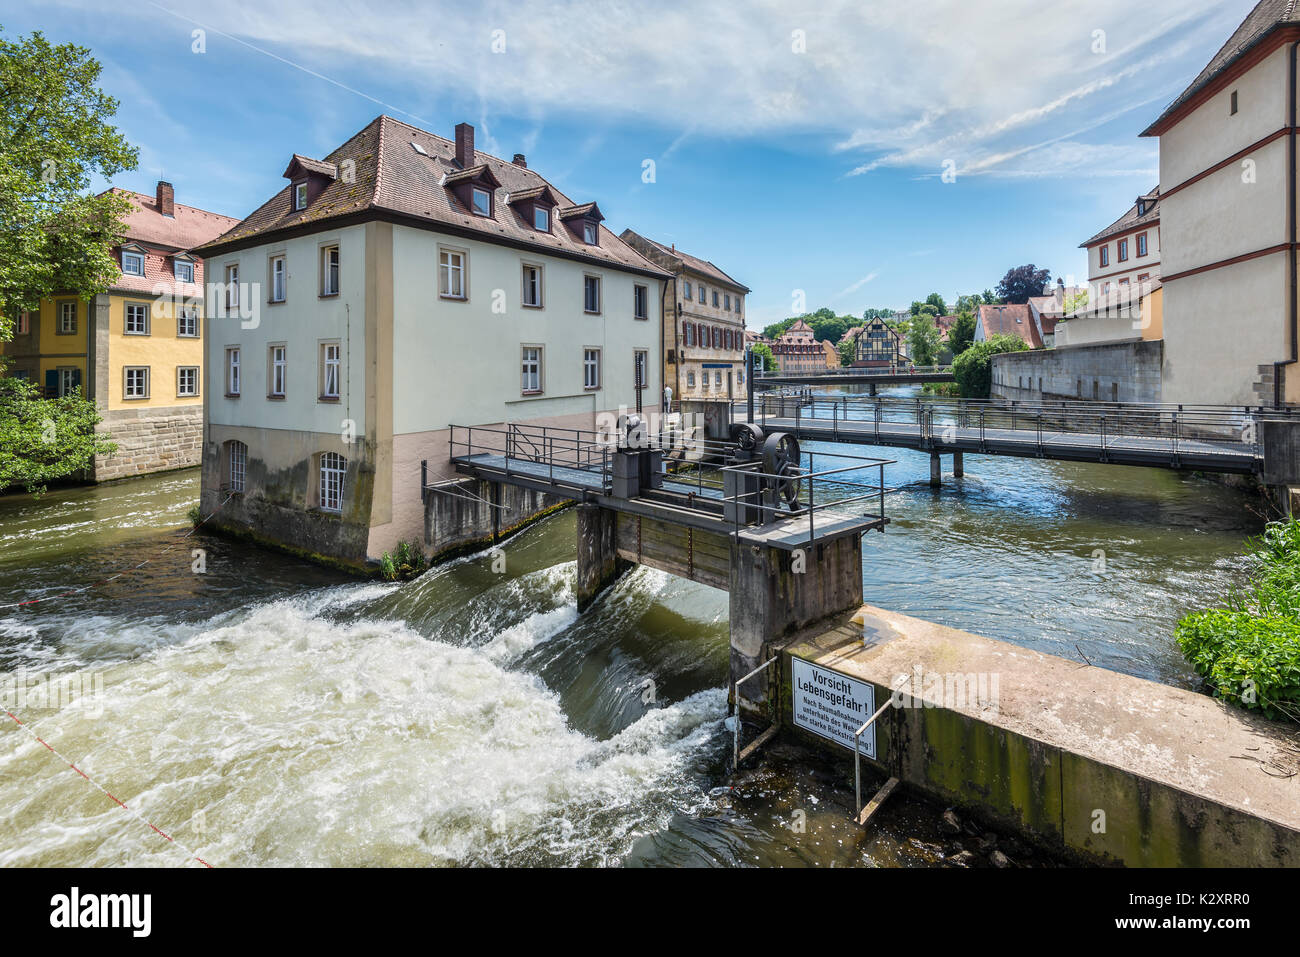 Bamberg, Germany - May 22, 2016: Dams, bridges, old houses on artificial islands and banks of the Regnitz river. Historic city center of Bamberg is a  Stock Photo